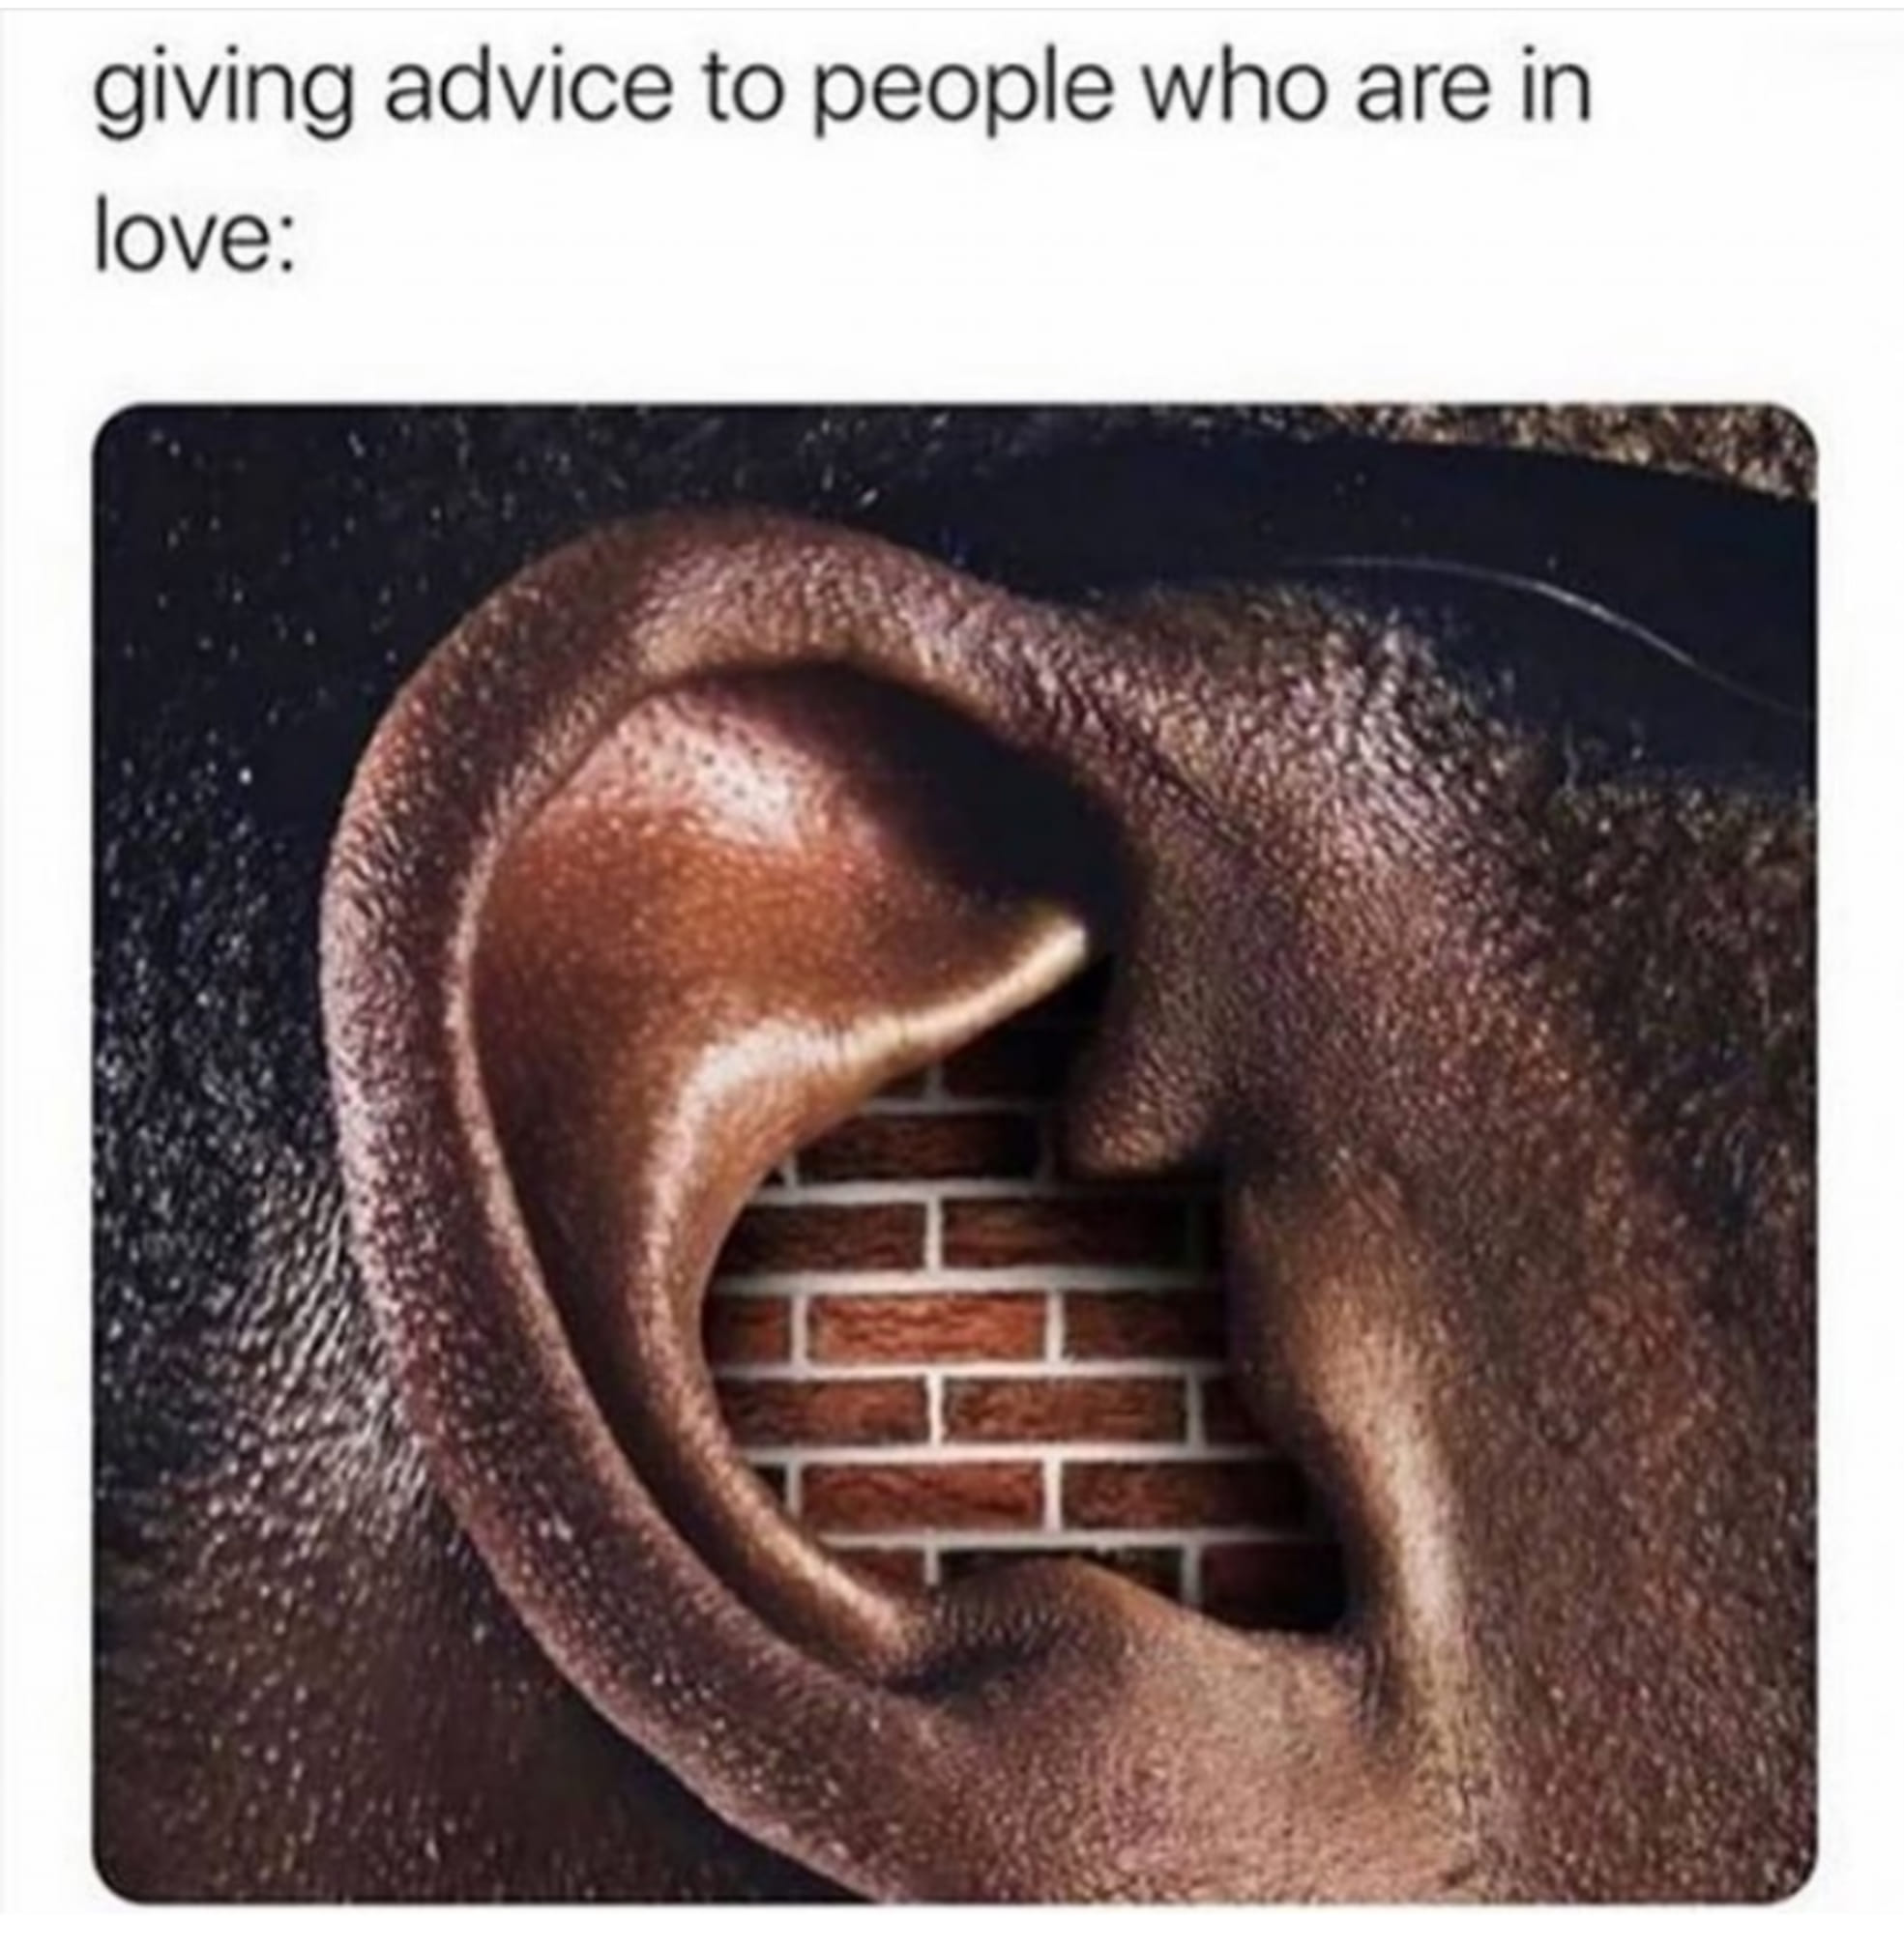 giving advice to people who are in love, ear, brick wall